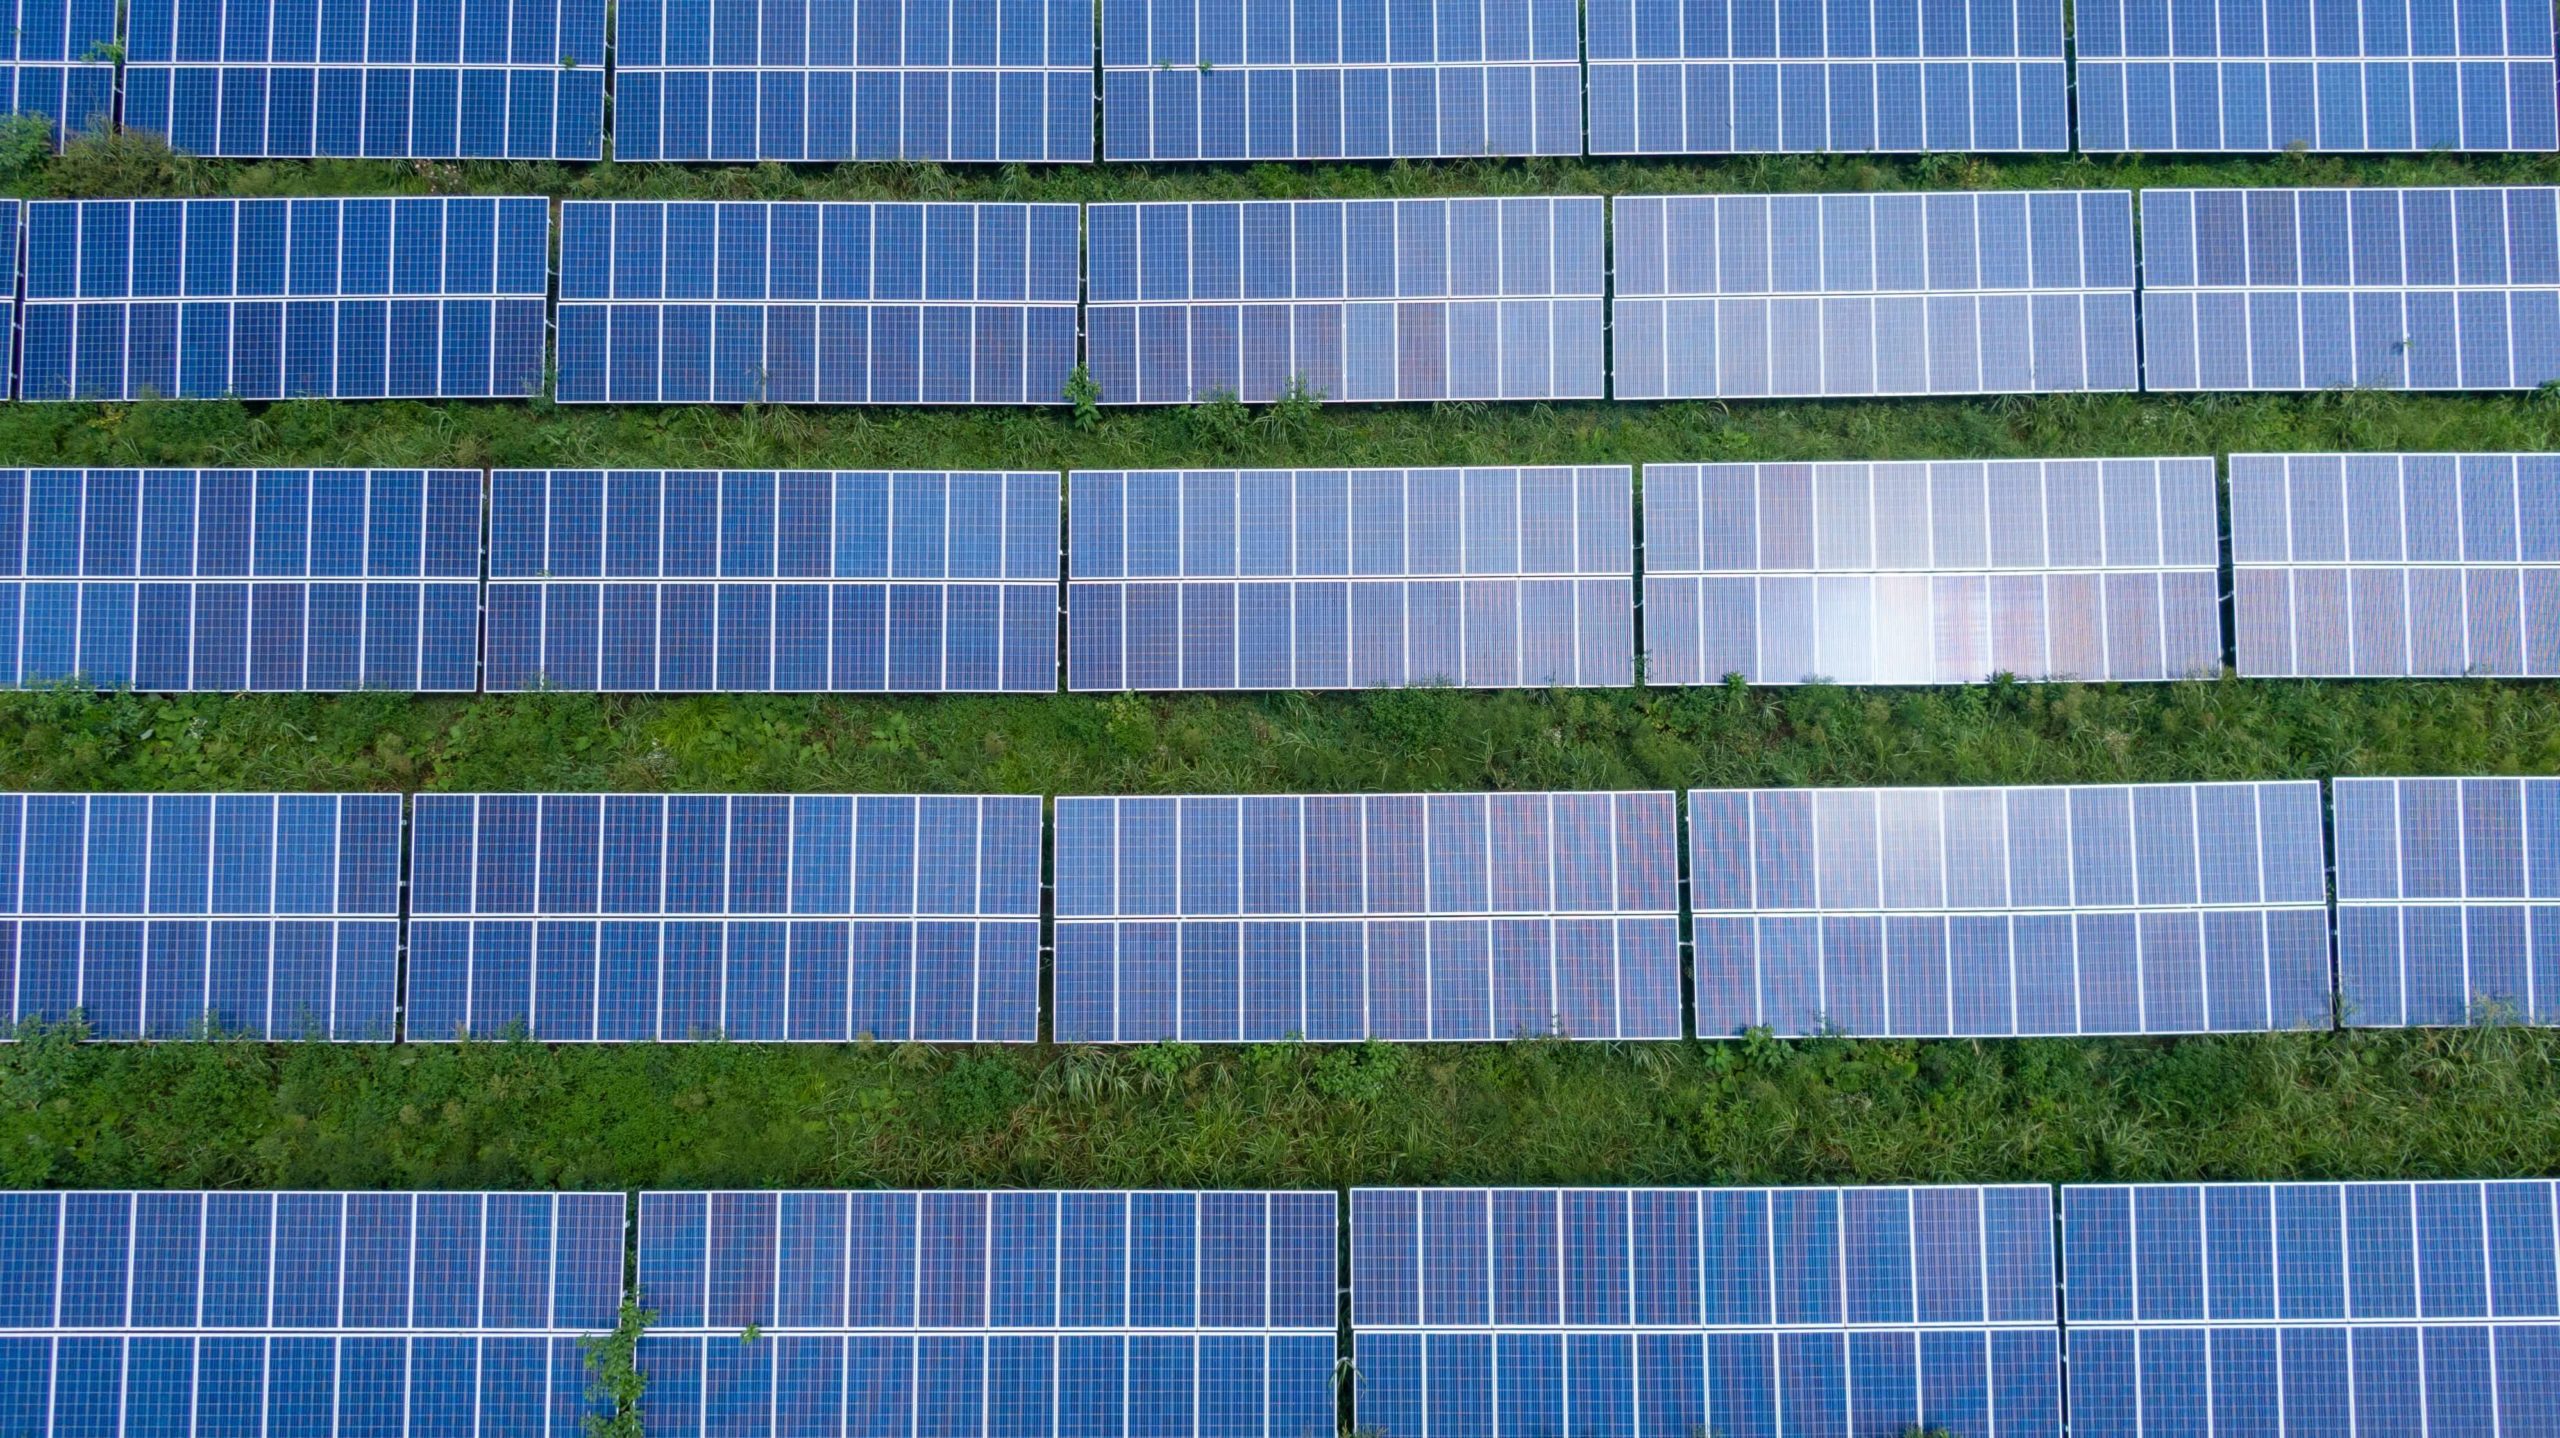 How Much Do Solar Panels Reduce Electricity Bills?